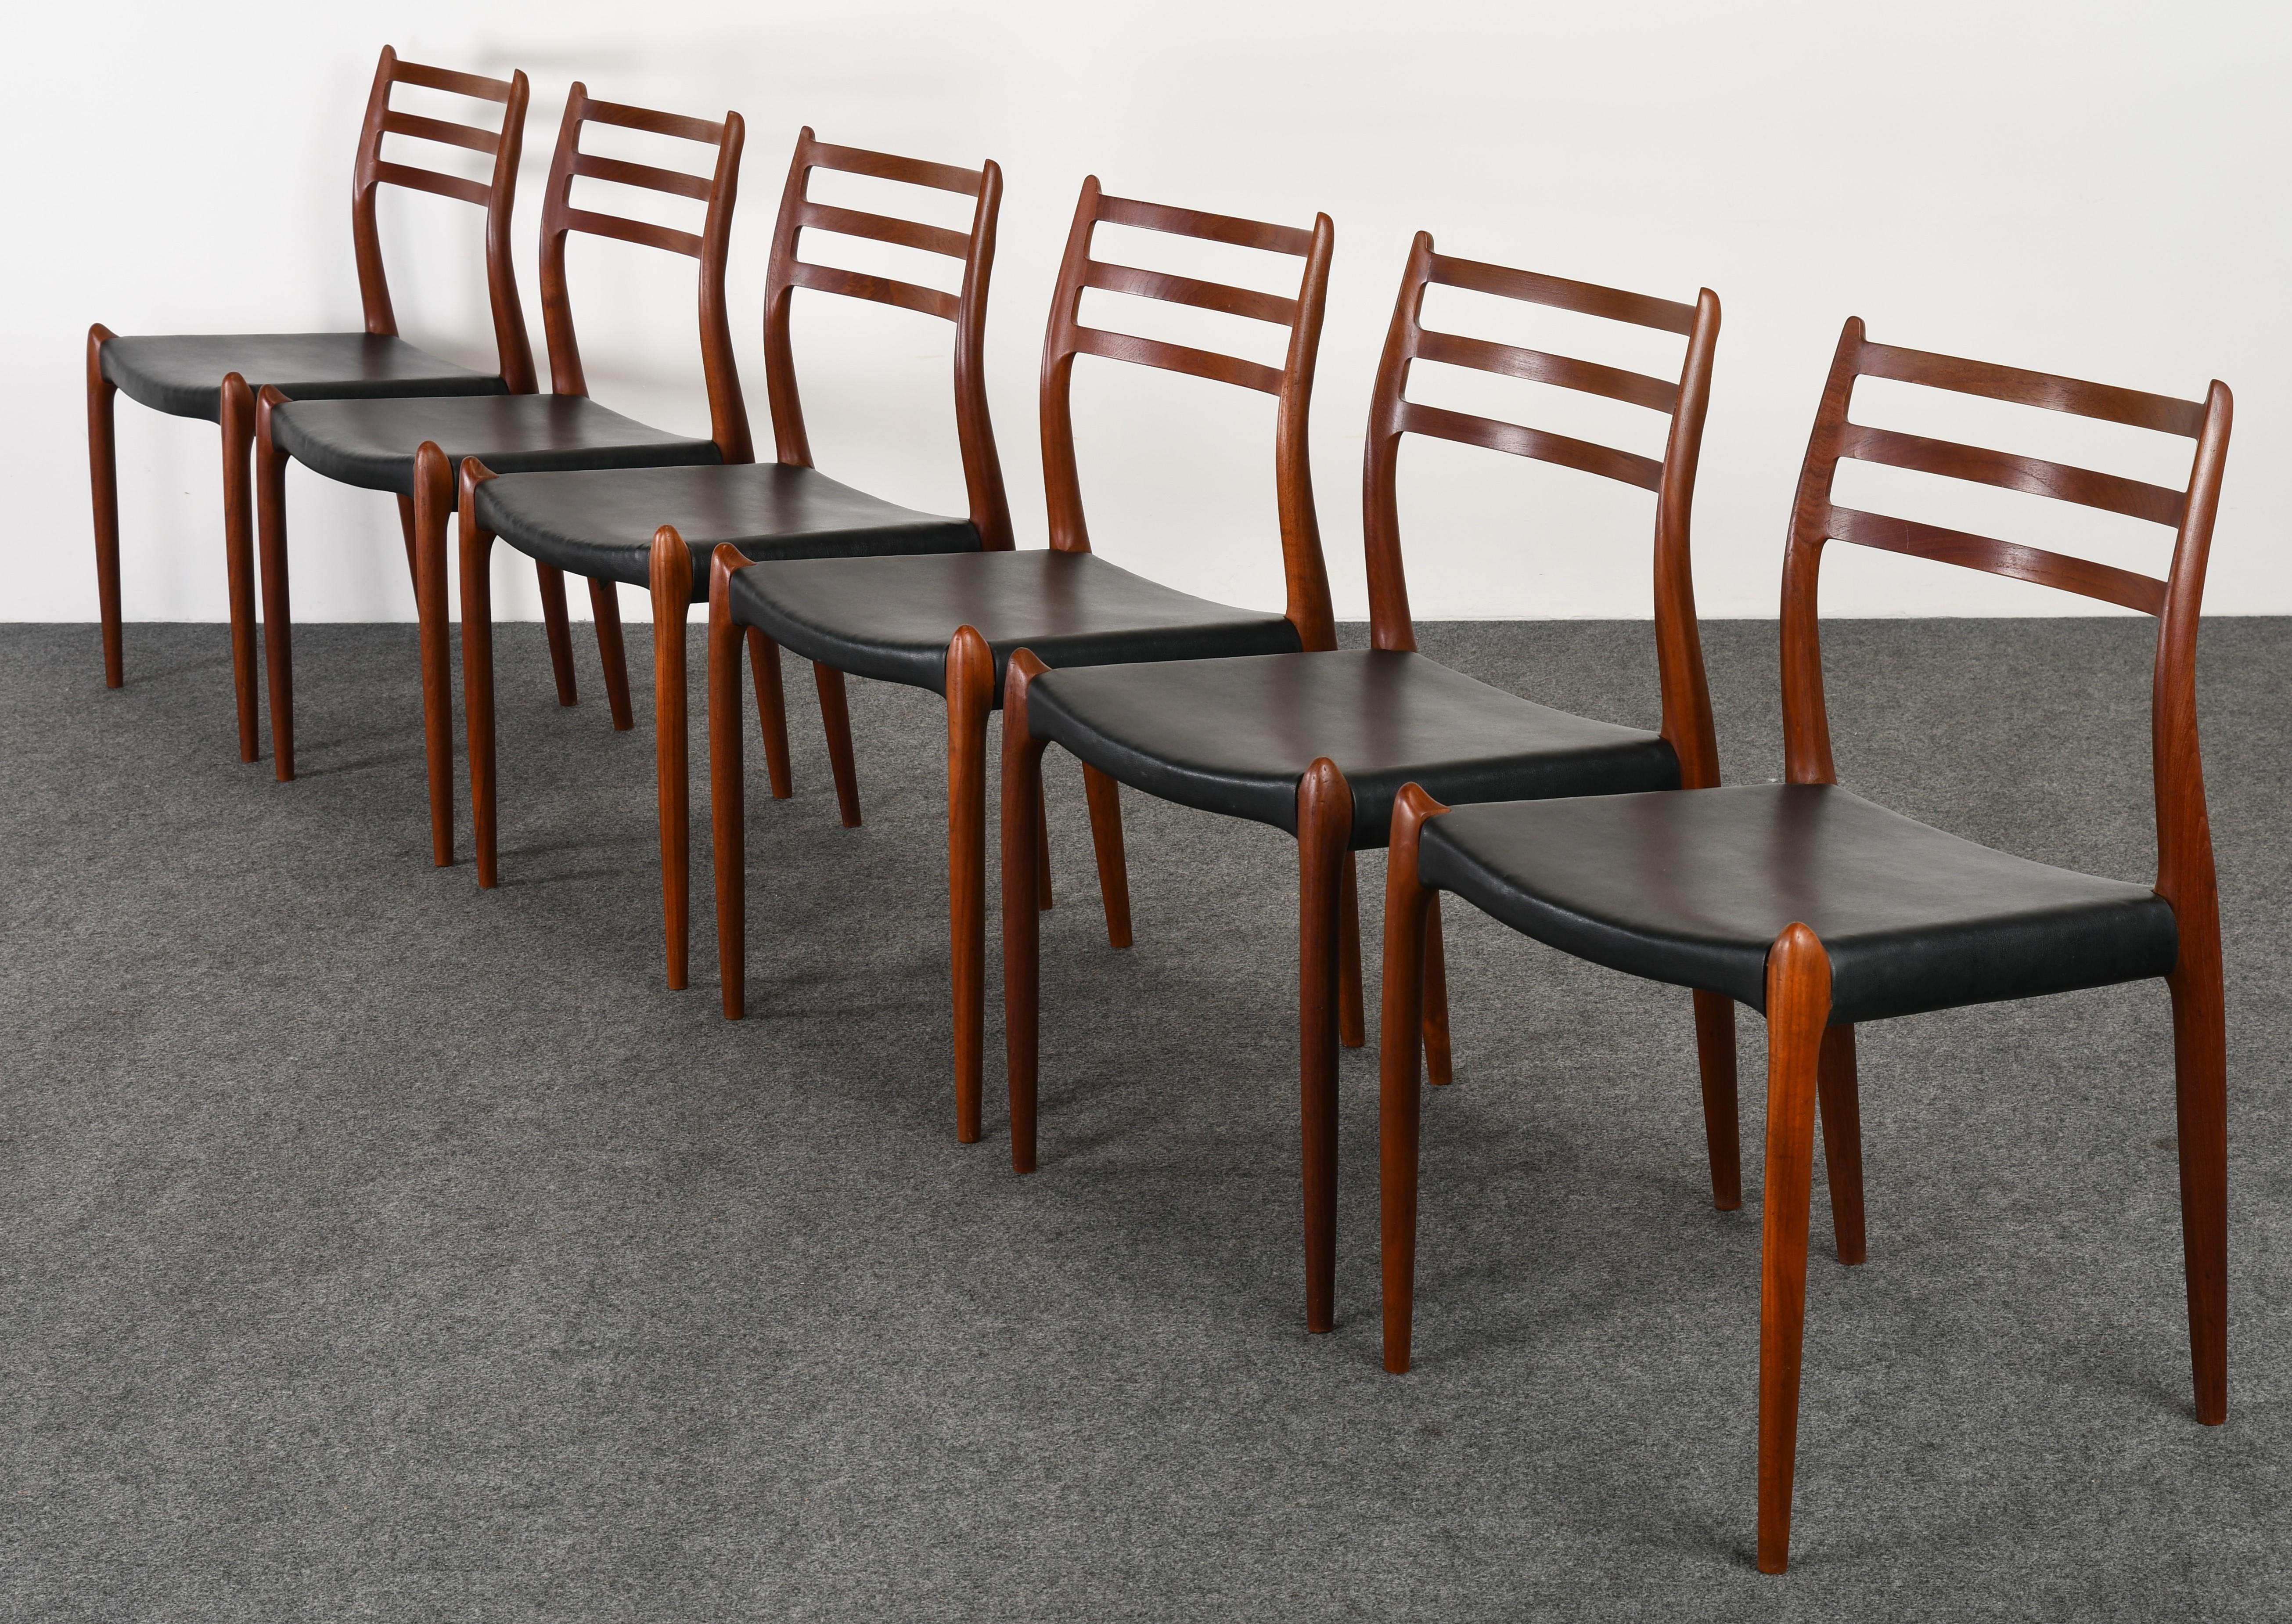 A wonderful set of six solid teak dining chairs was designed by Niels Moller in 1962. The chairs have the original leather seats. They are sturdy and structurally sound with age-appropriate wear. Would look great in any mid-century or modern